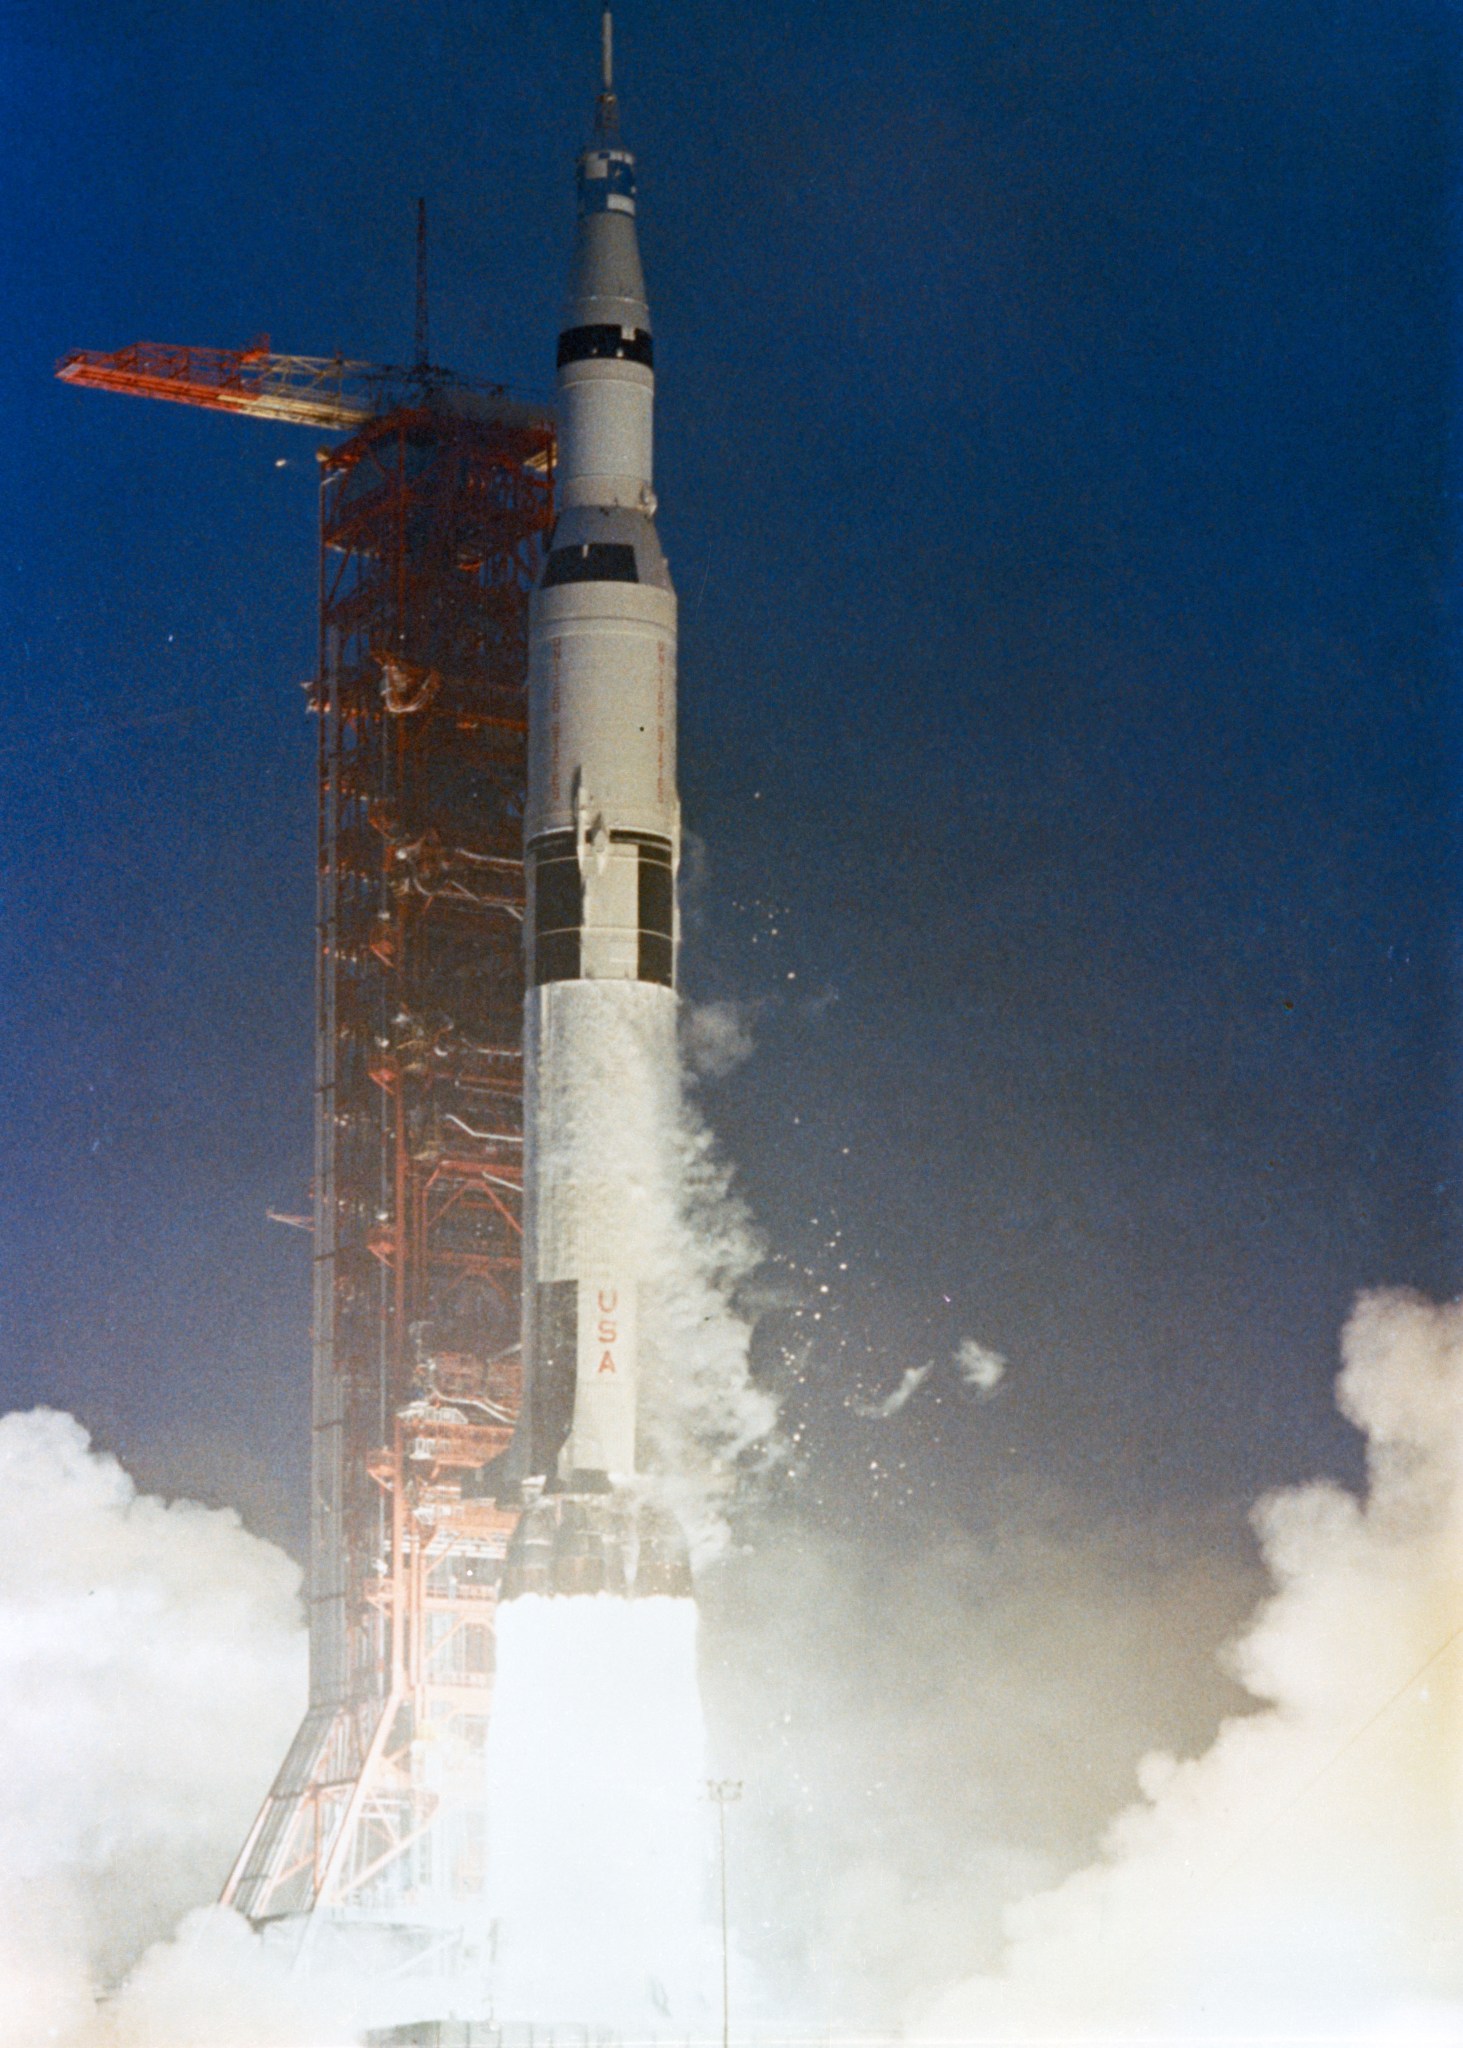 This week in 1969, the Apollo 12 mission launched from NASA’s Kennedy Space Center.